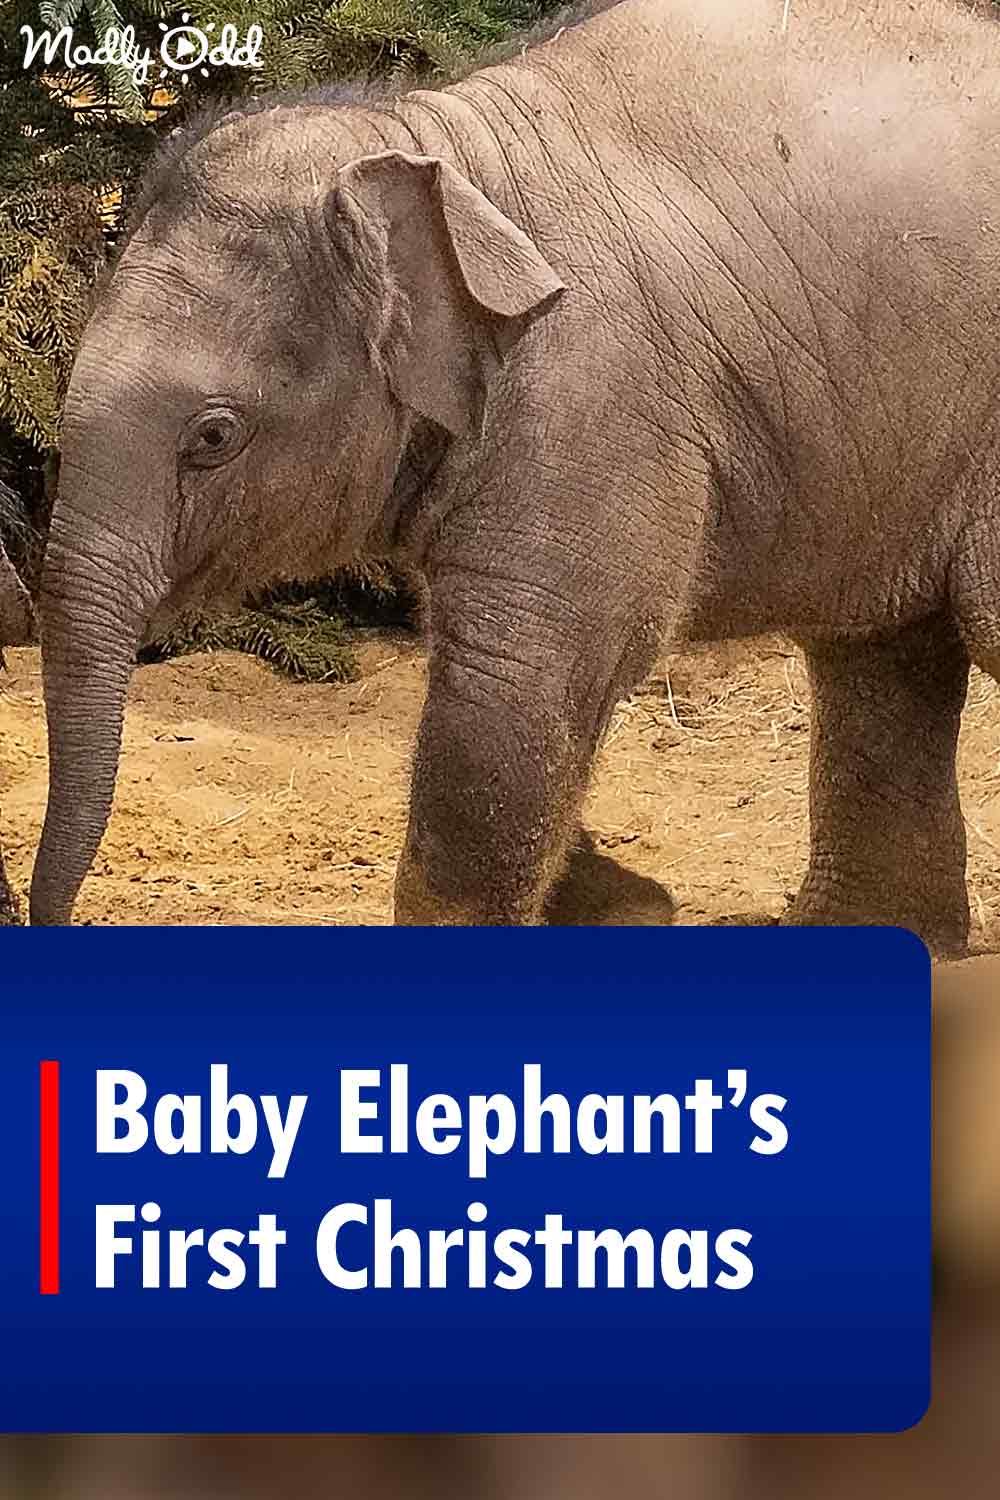 Baby Elephant’s First Christmas